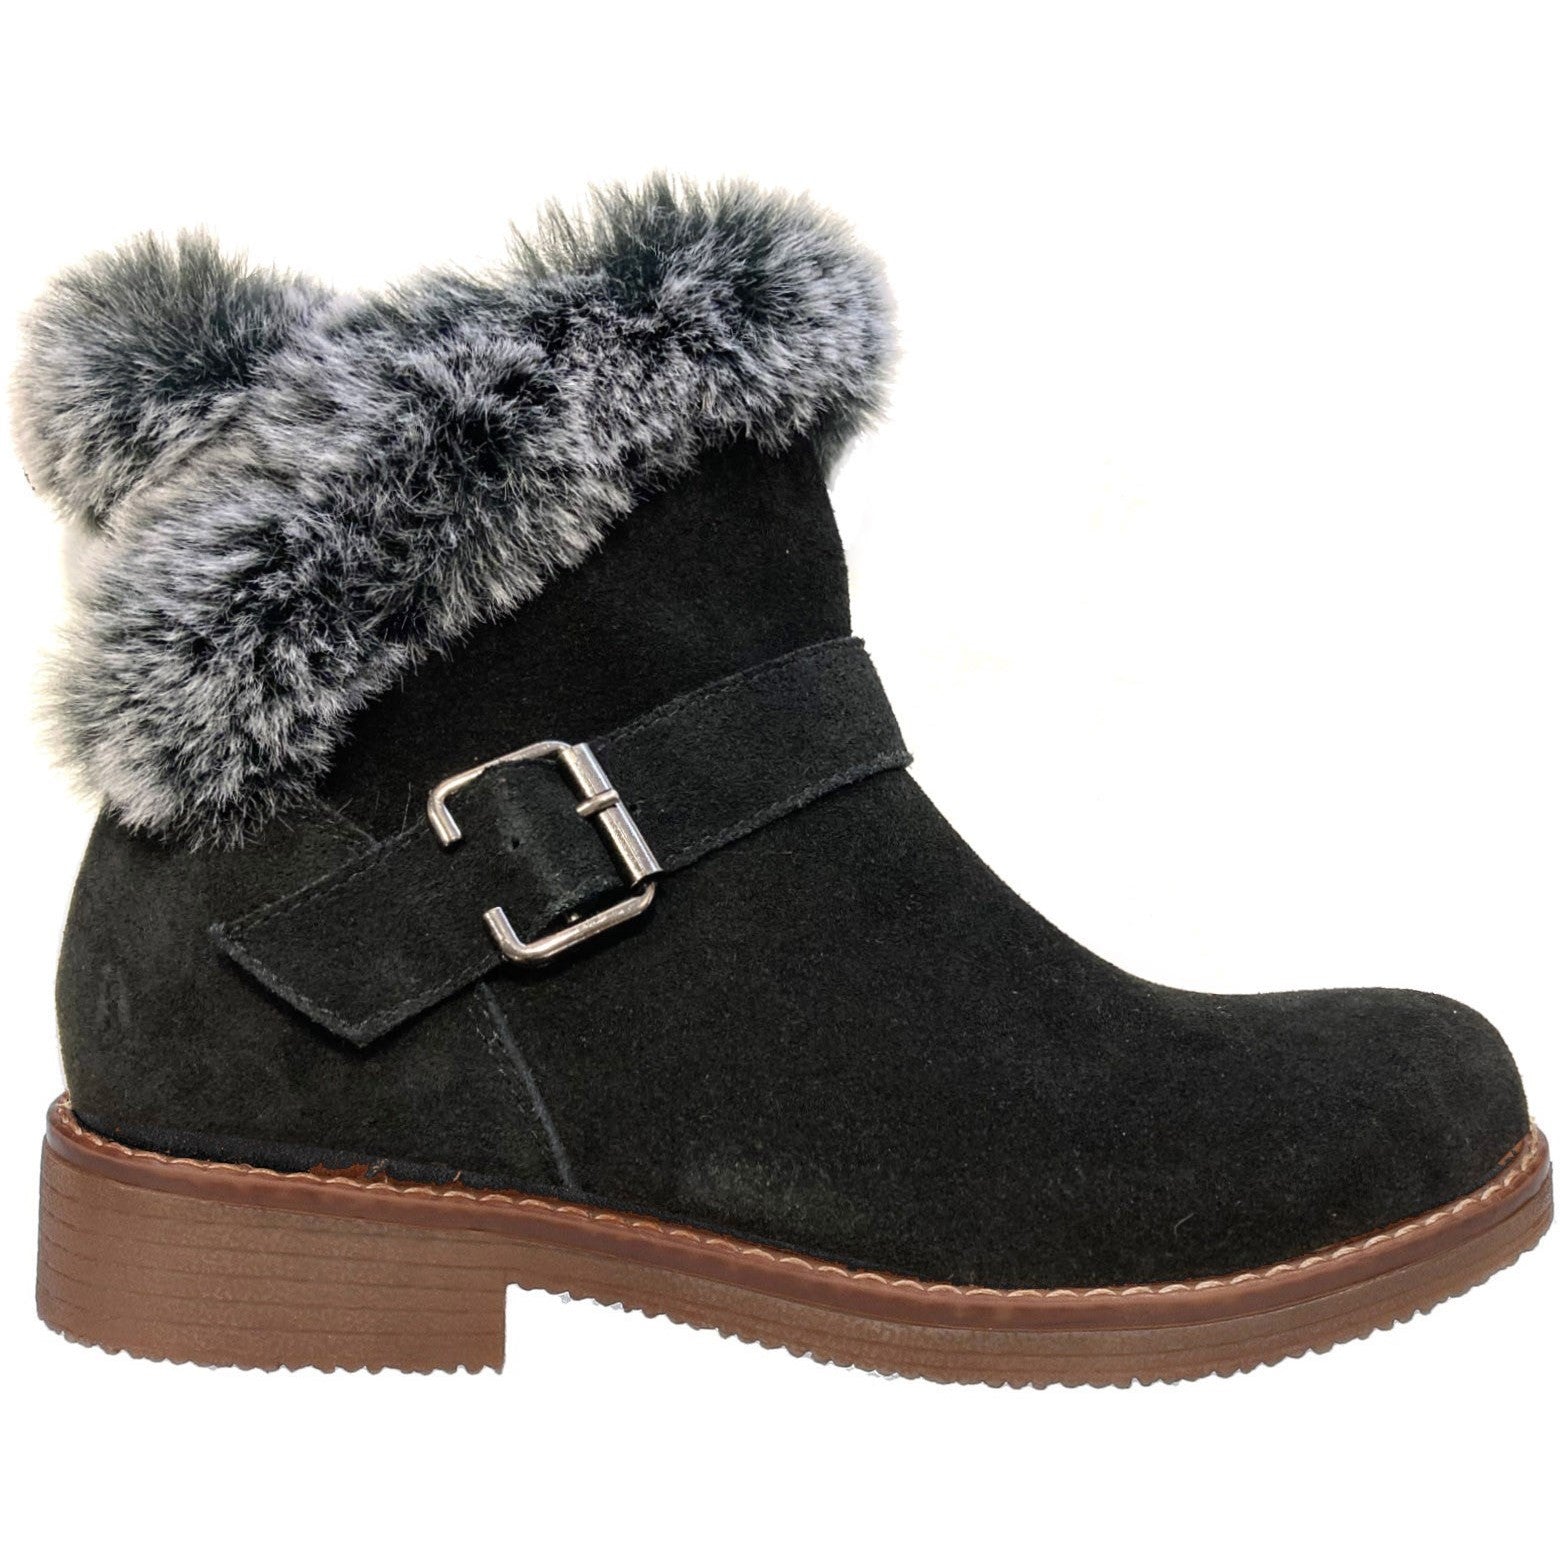 Hush Puppies Womens Hannah Suede Boot - Black